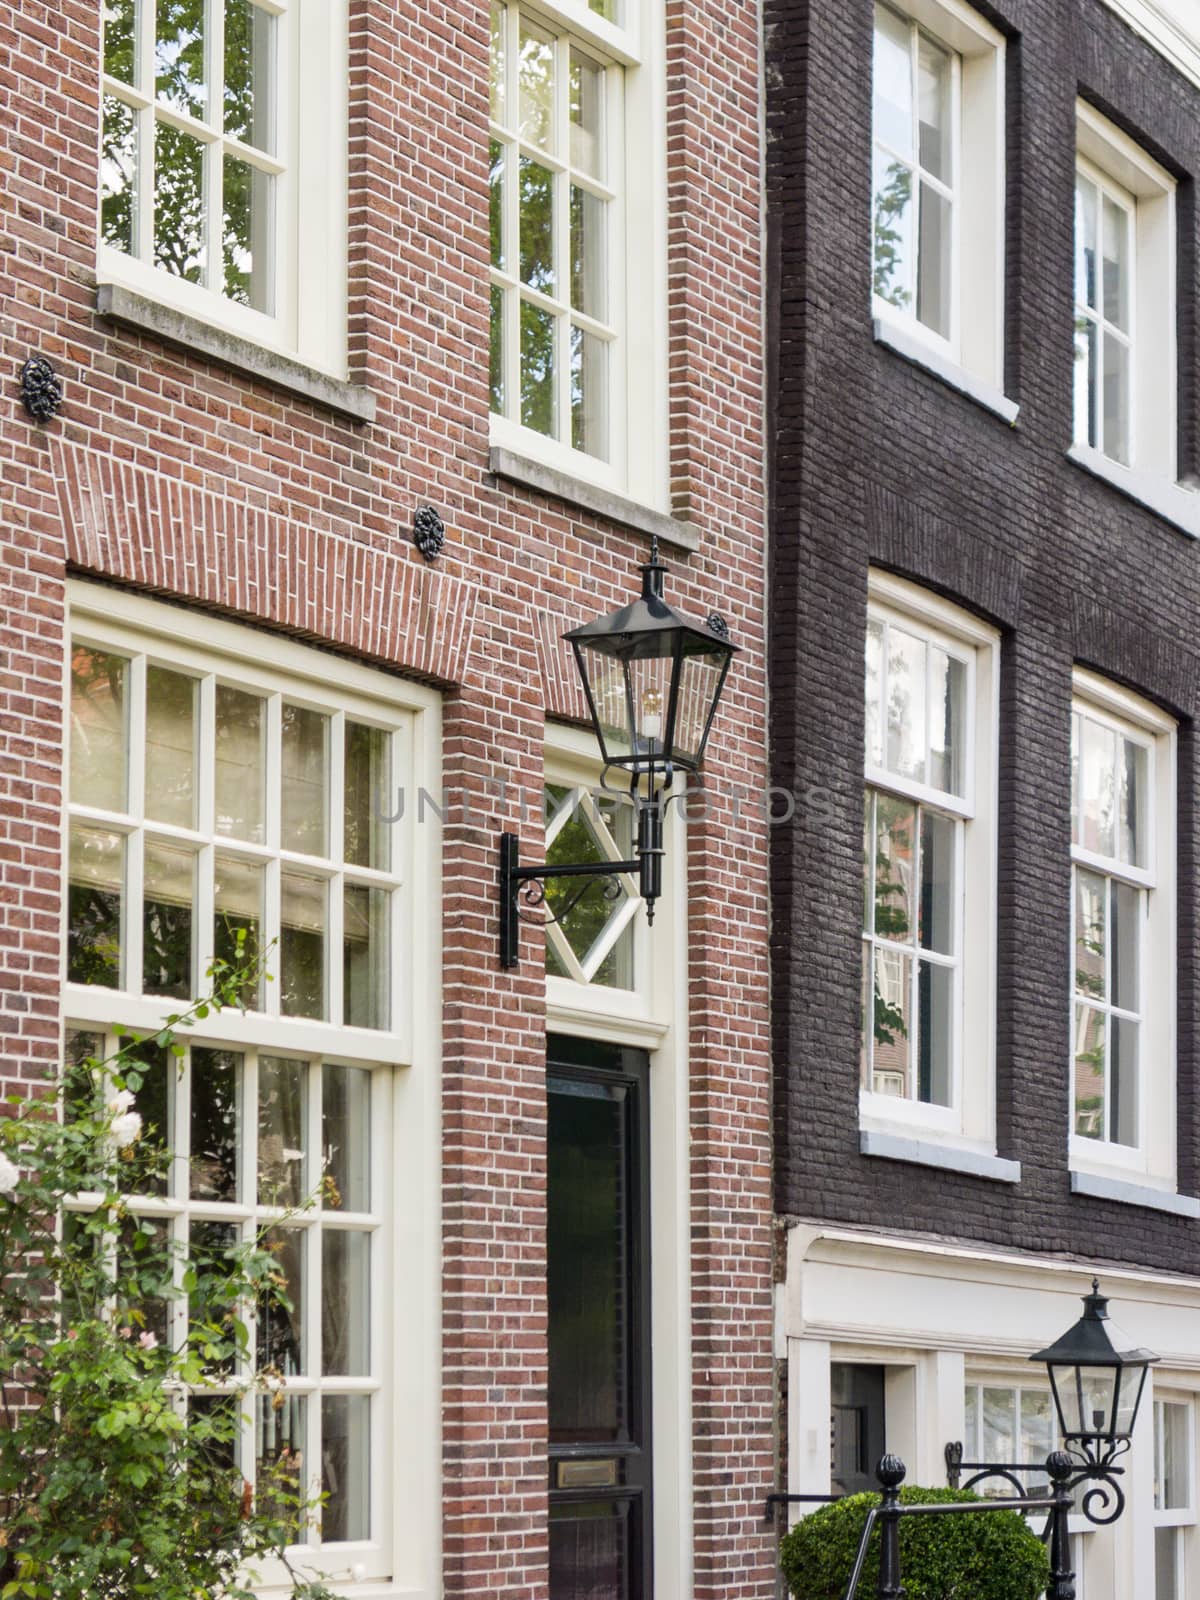 House in in a street by a canal in Amsterdam by chrisukphoto